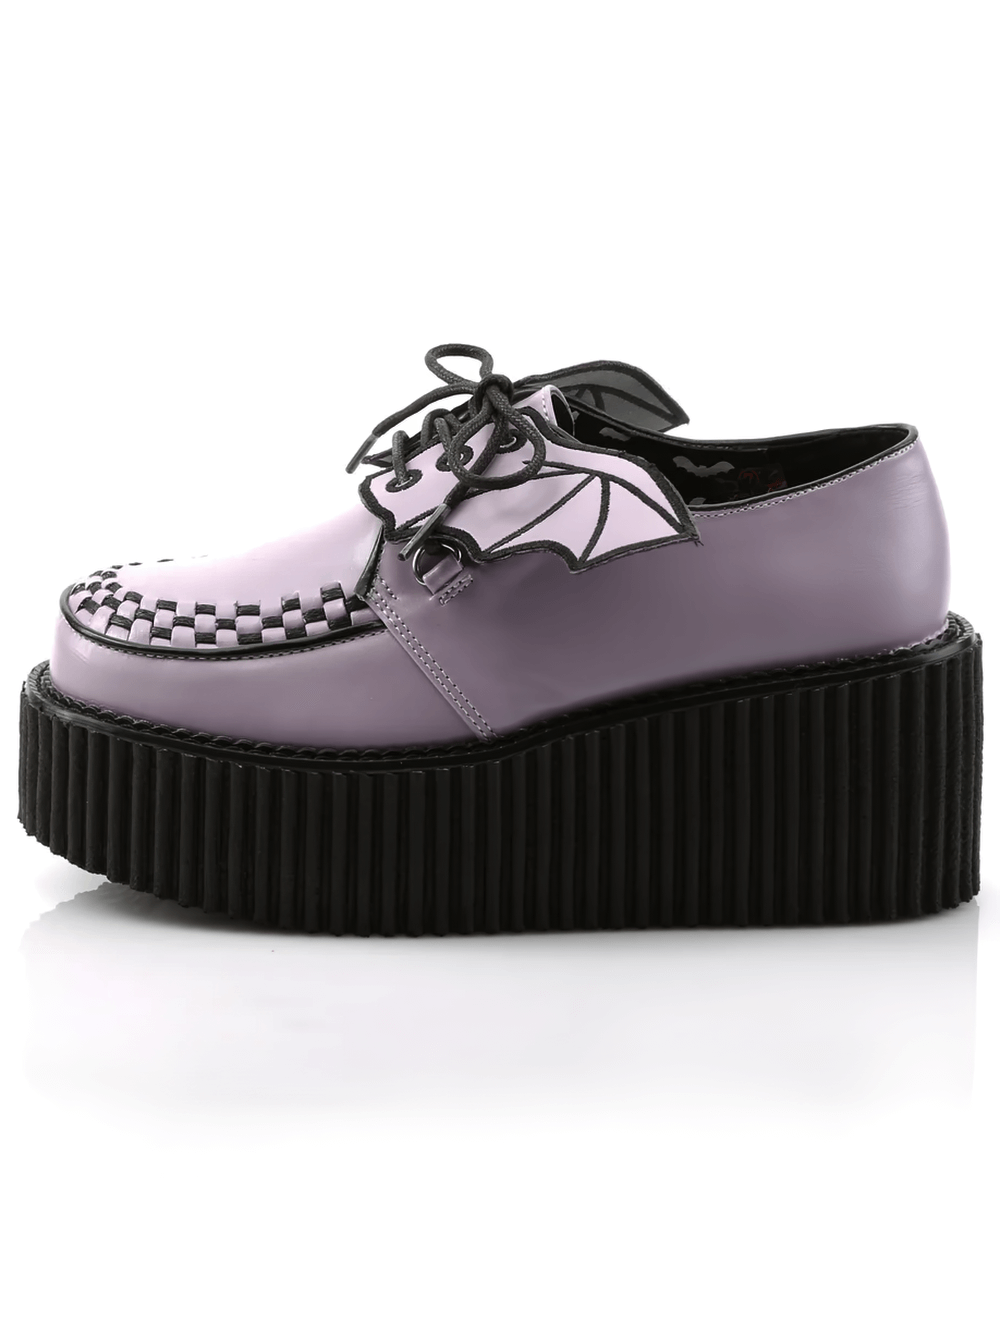 DEMONIA Gothic Platform Creepers with Detachable Bat Wings